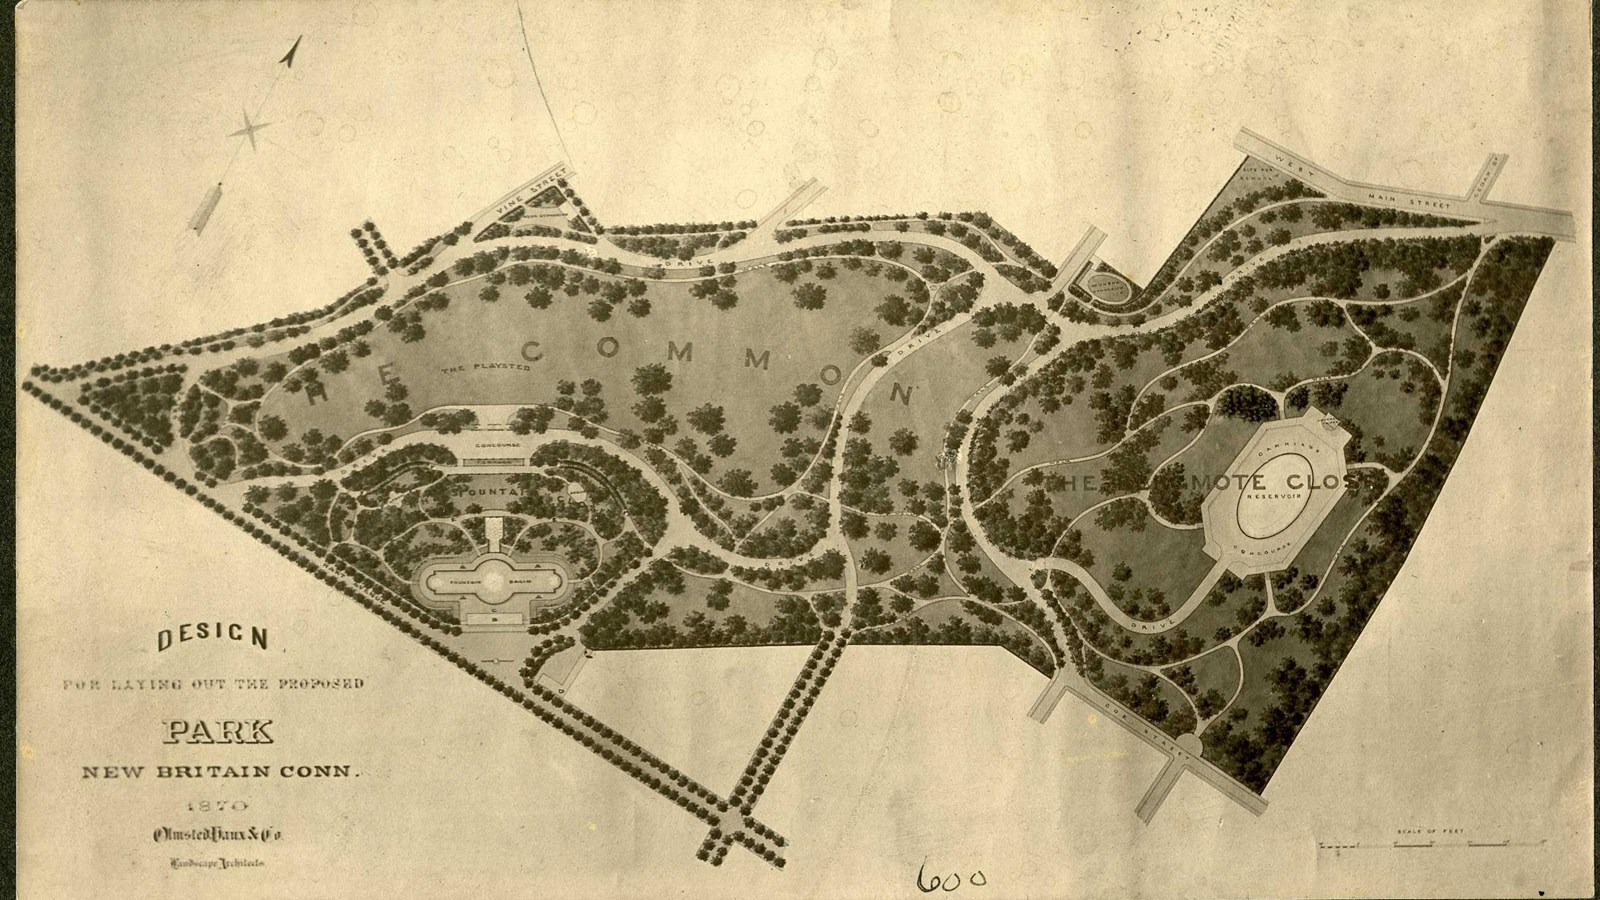 Plan of park with open grassy common area, curving paths with lots of trees around them